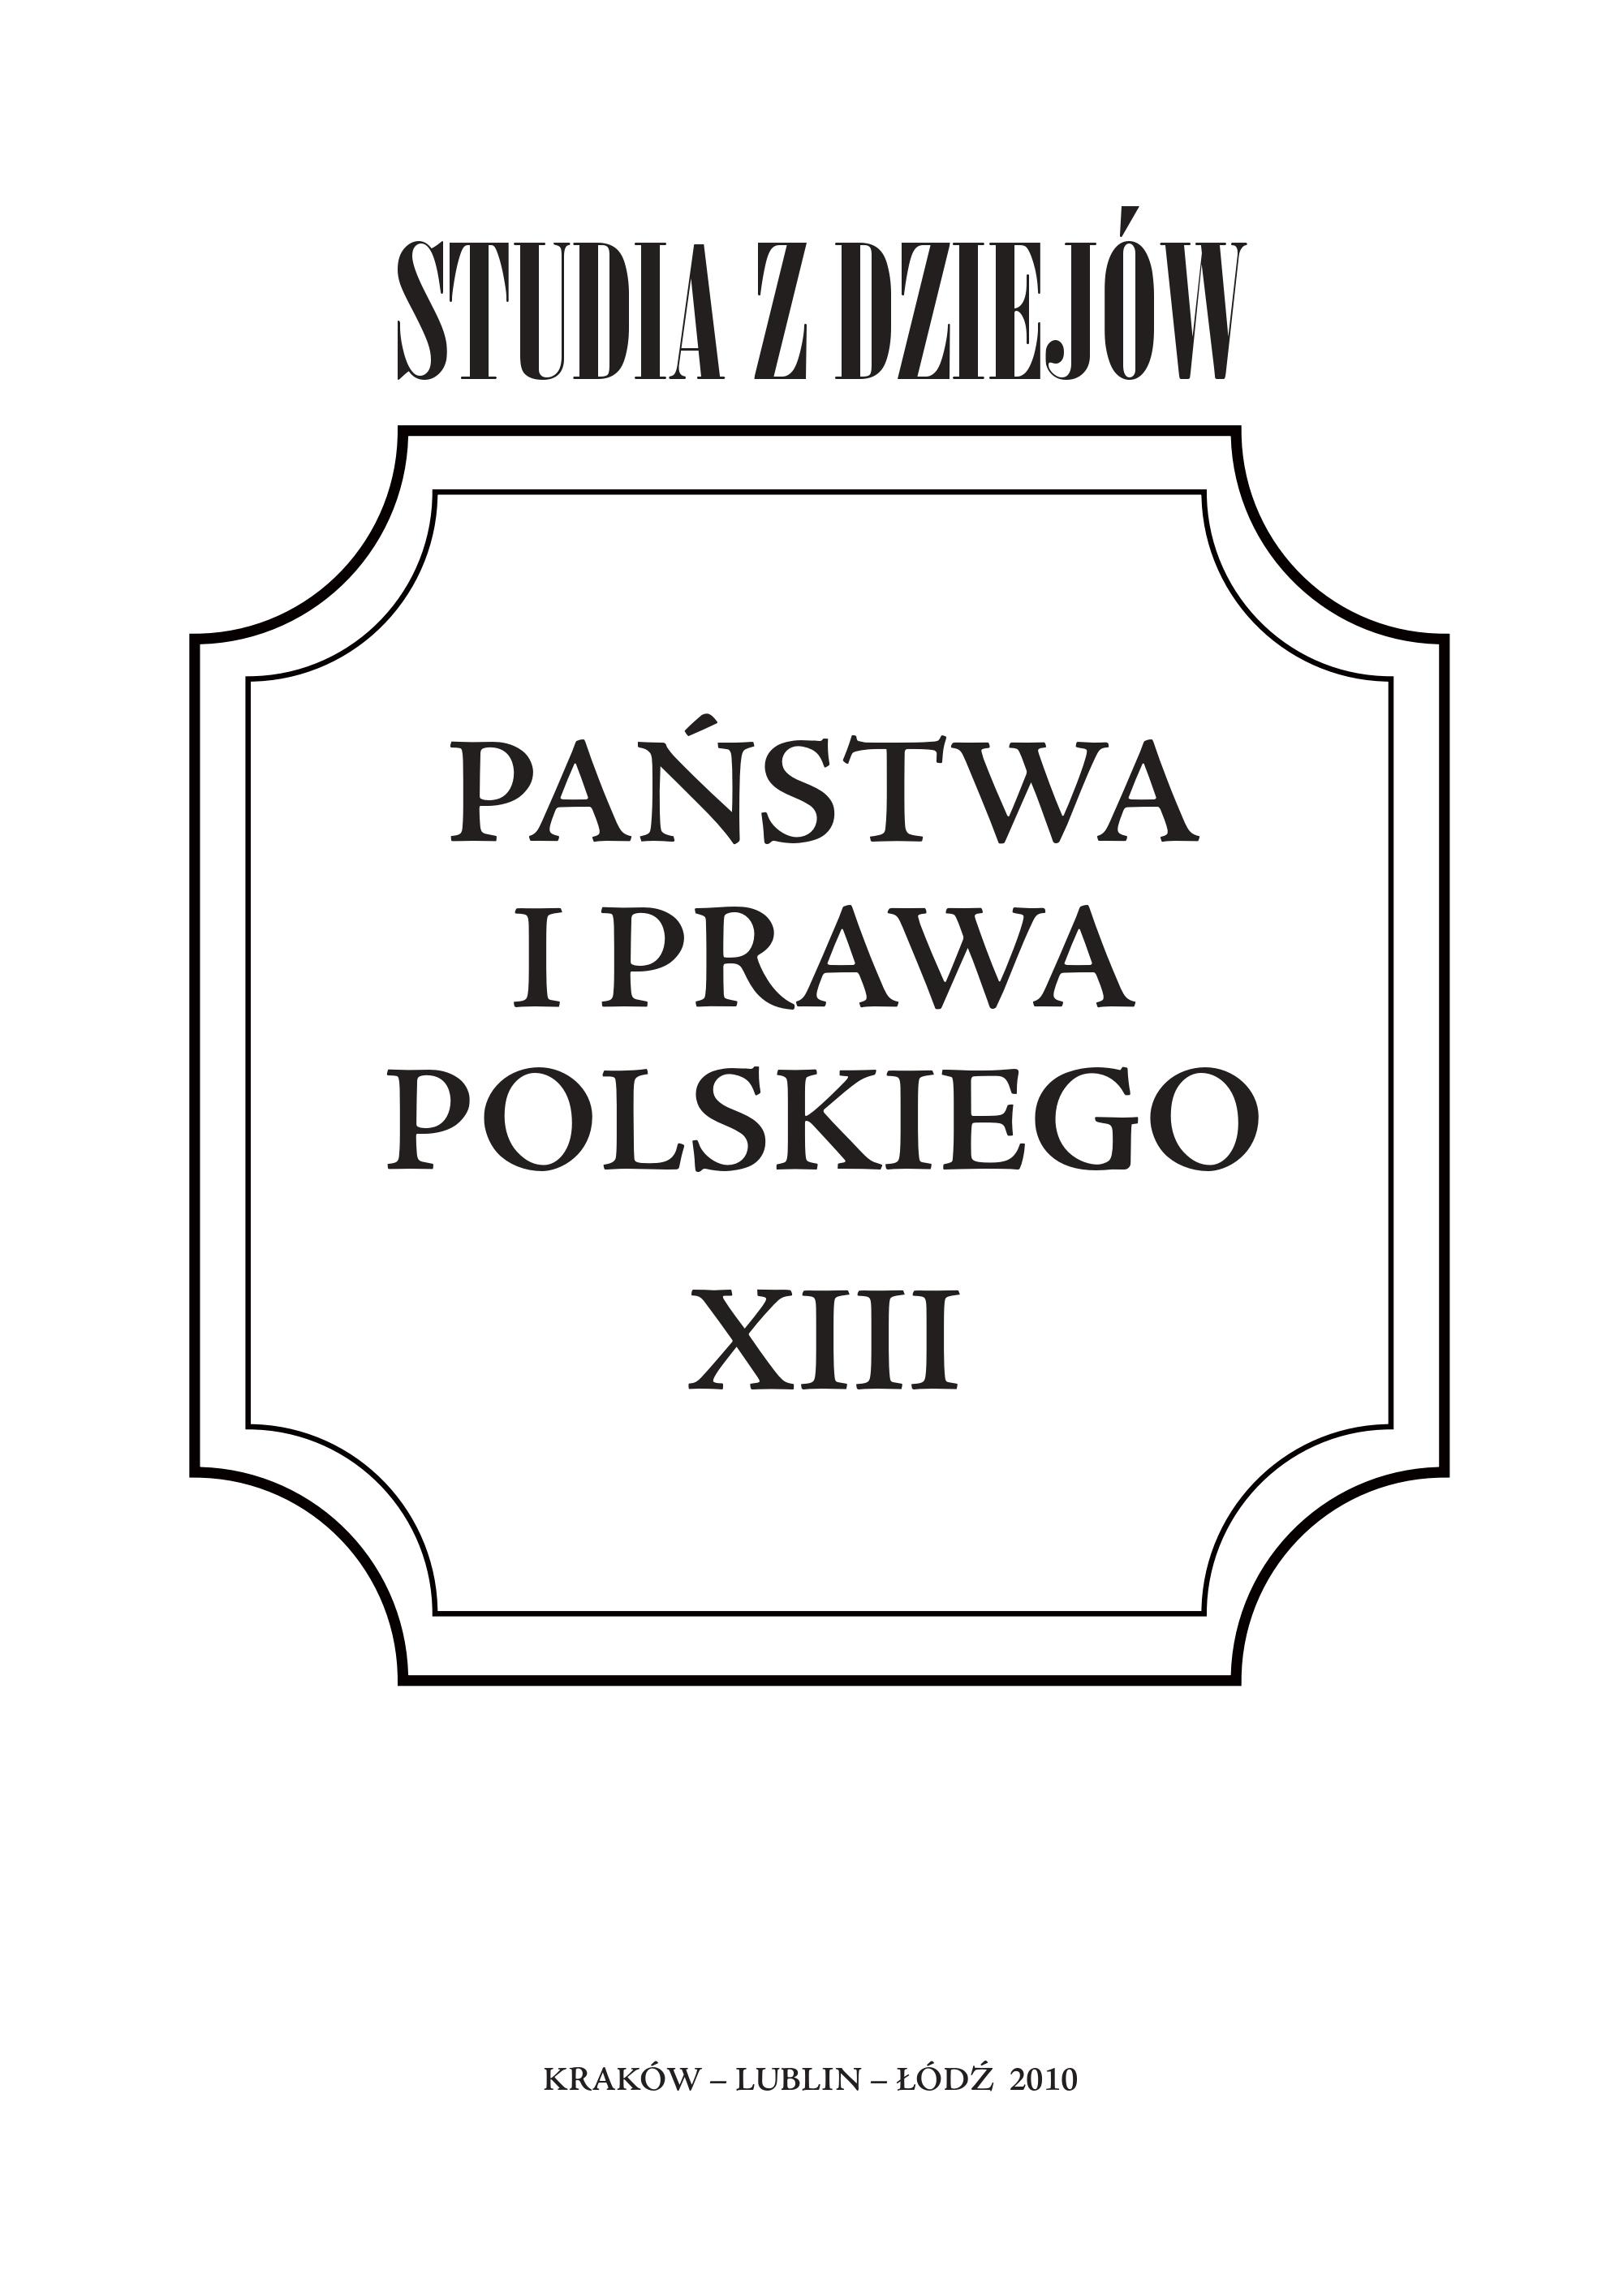 Construction of incitement and aiding in the work on the Polish criminal code of 11 July 1932. Cover Image